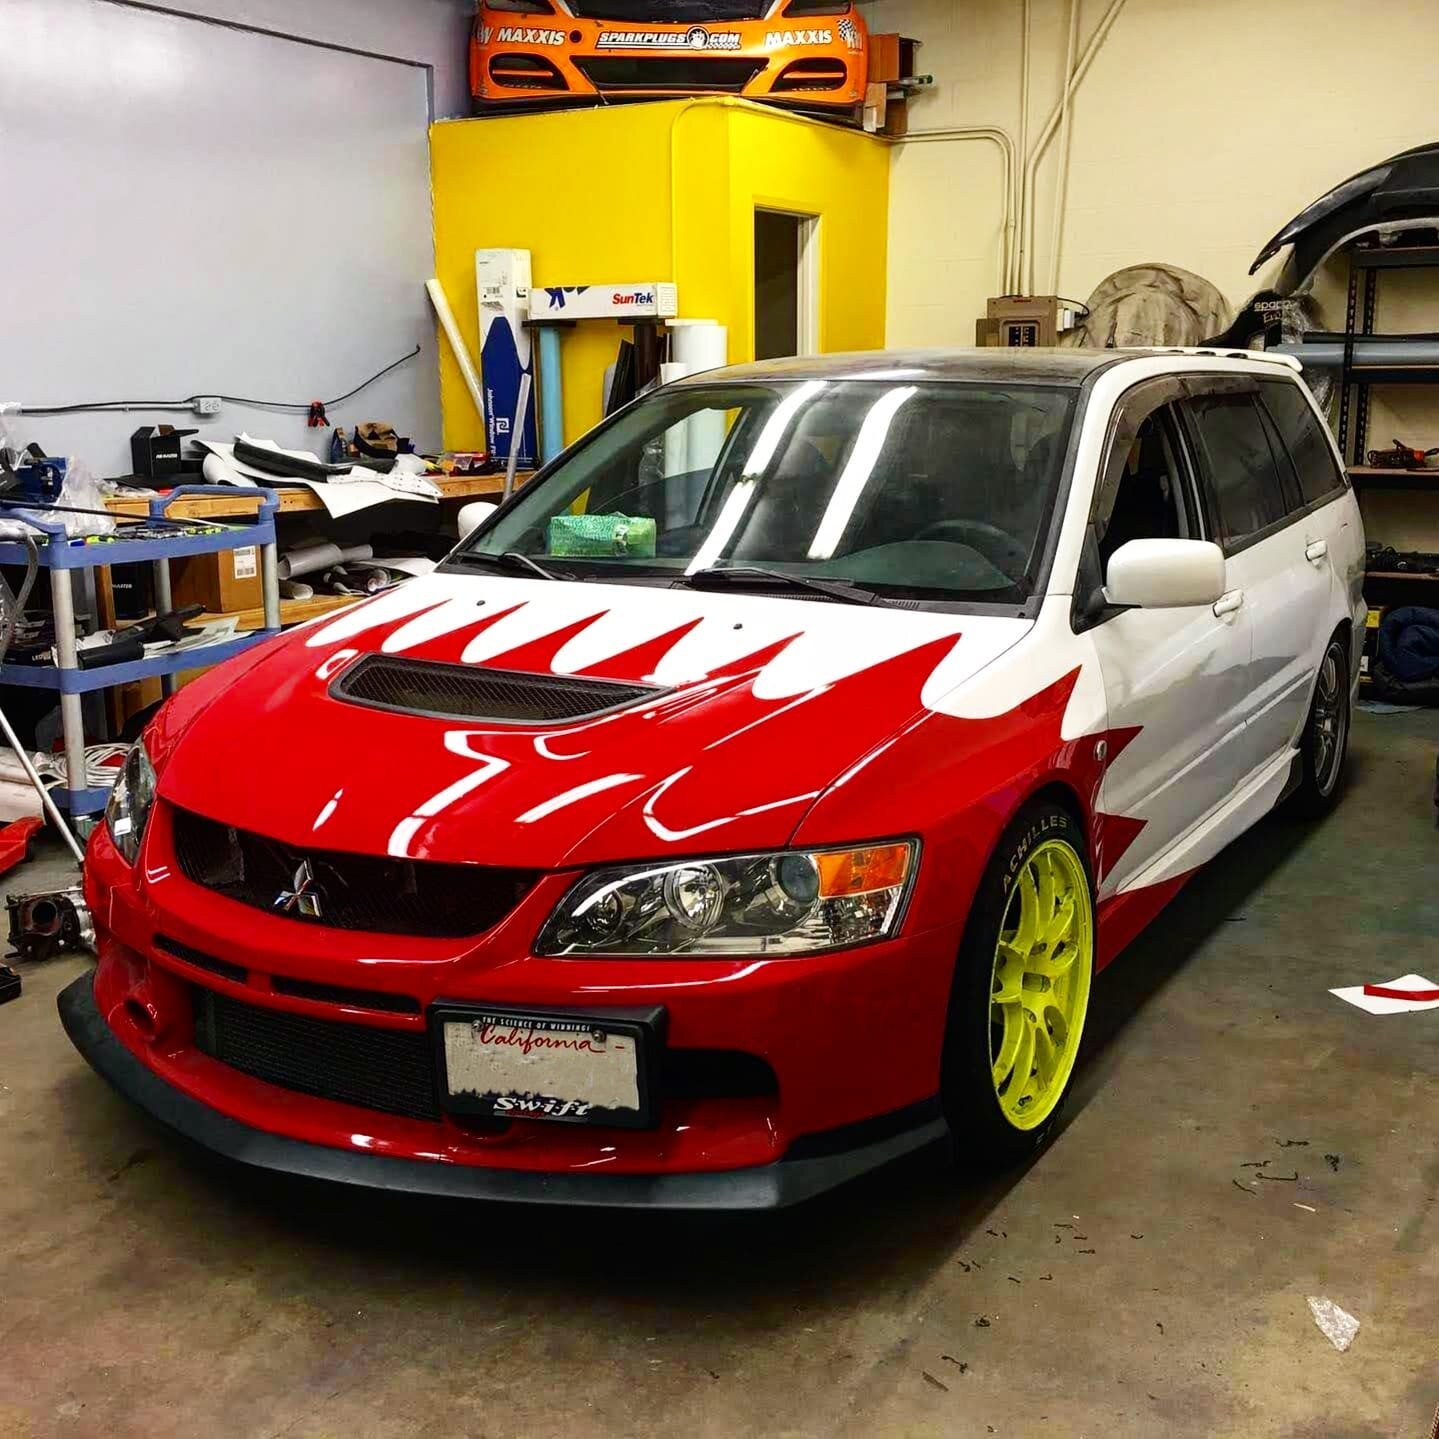 Mitsubishi Evo Front End Conversion and Cyber Evo Livery
🔹🔹🔹🔹🔹🔹🔹🔹🔹🔹🔹🔹🔹🔹🔹🔹🔹🔹🔹🔹
#cars #carlifestyle #carlife #instacars #carsofinstagram #carswithoutlimits #carstagram #carporn #mitsubishi #mitsubishilancer #mitsubishievo #mitsubish